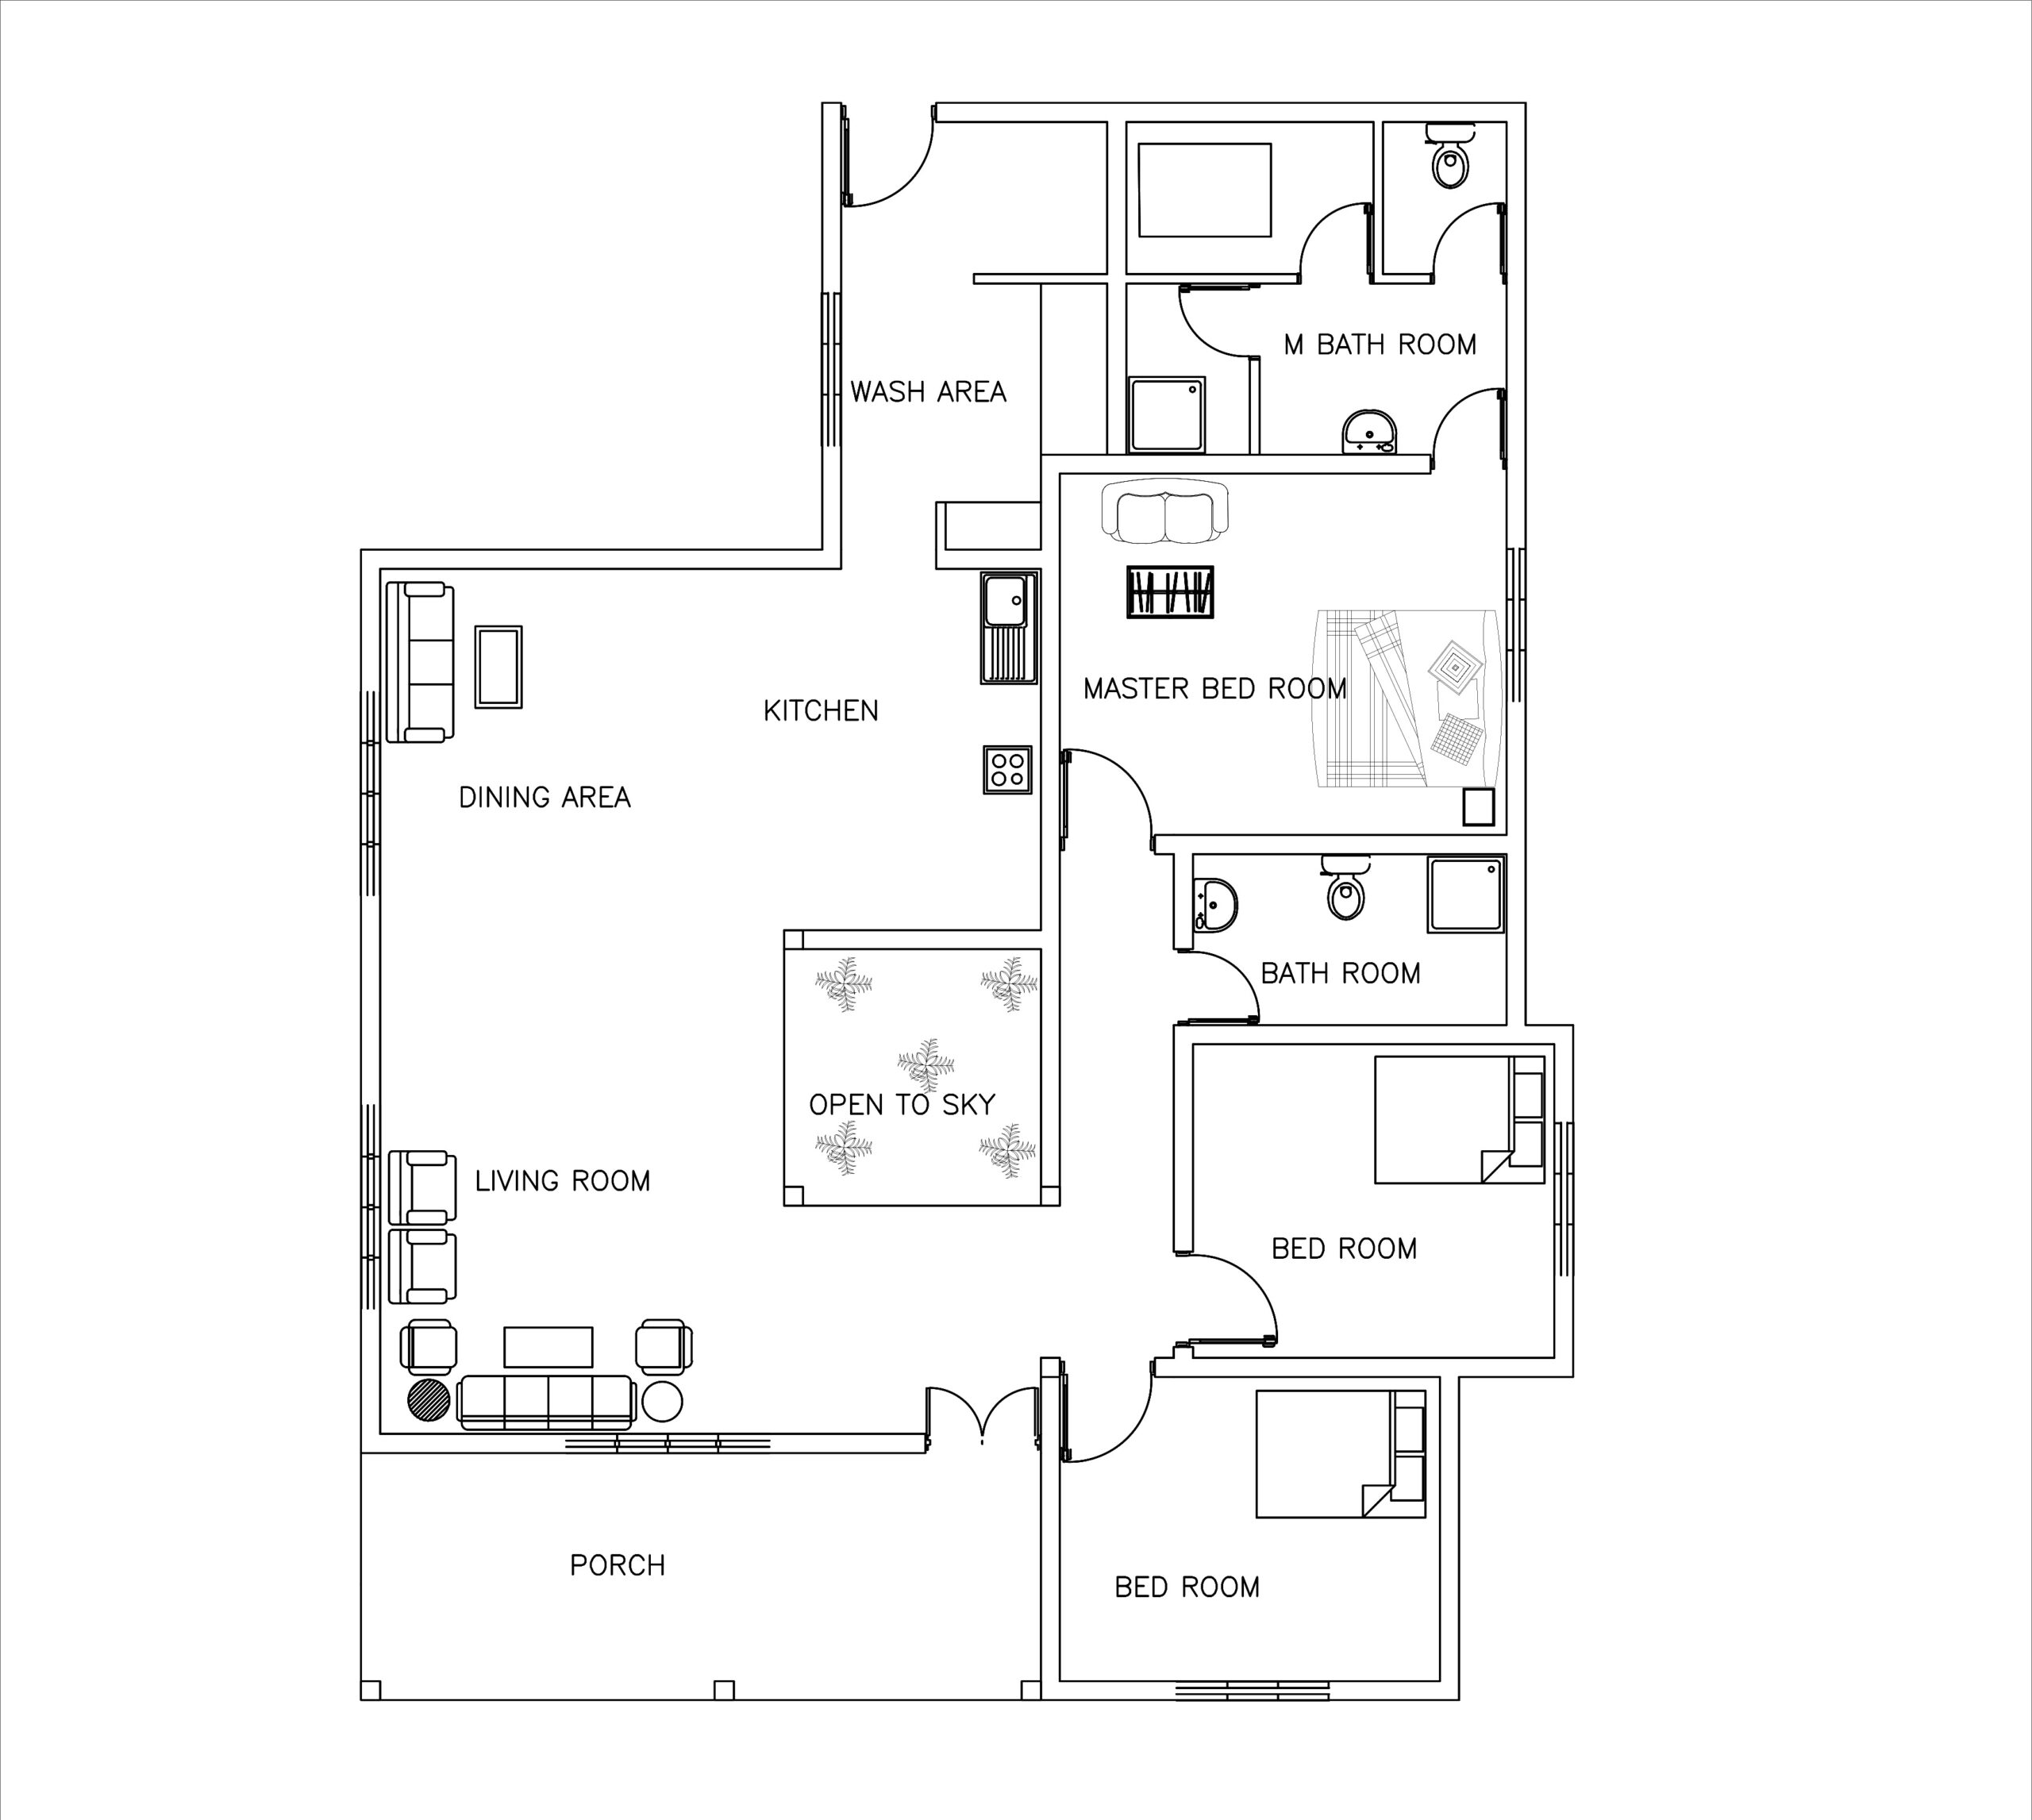 Remarkable single story three bed room house plan | www dwgnet for popular 3 bed room home pplan single floor